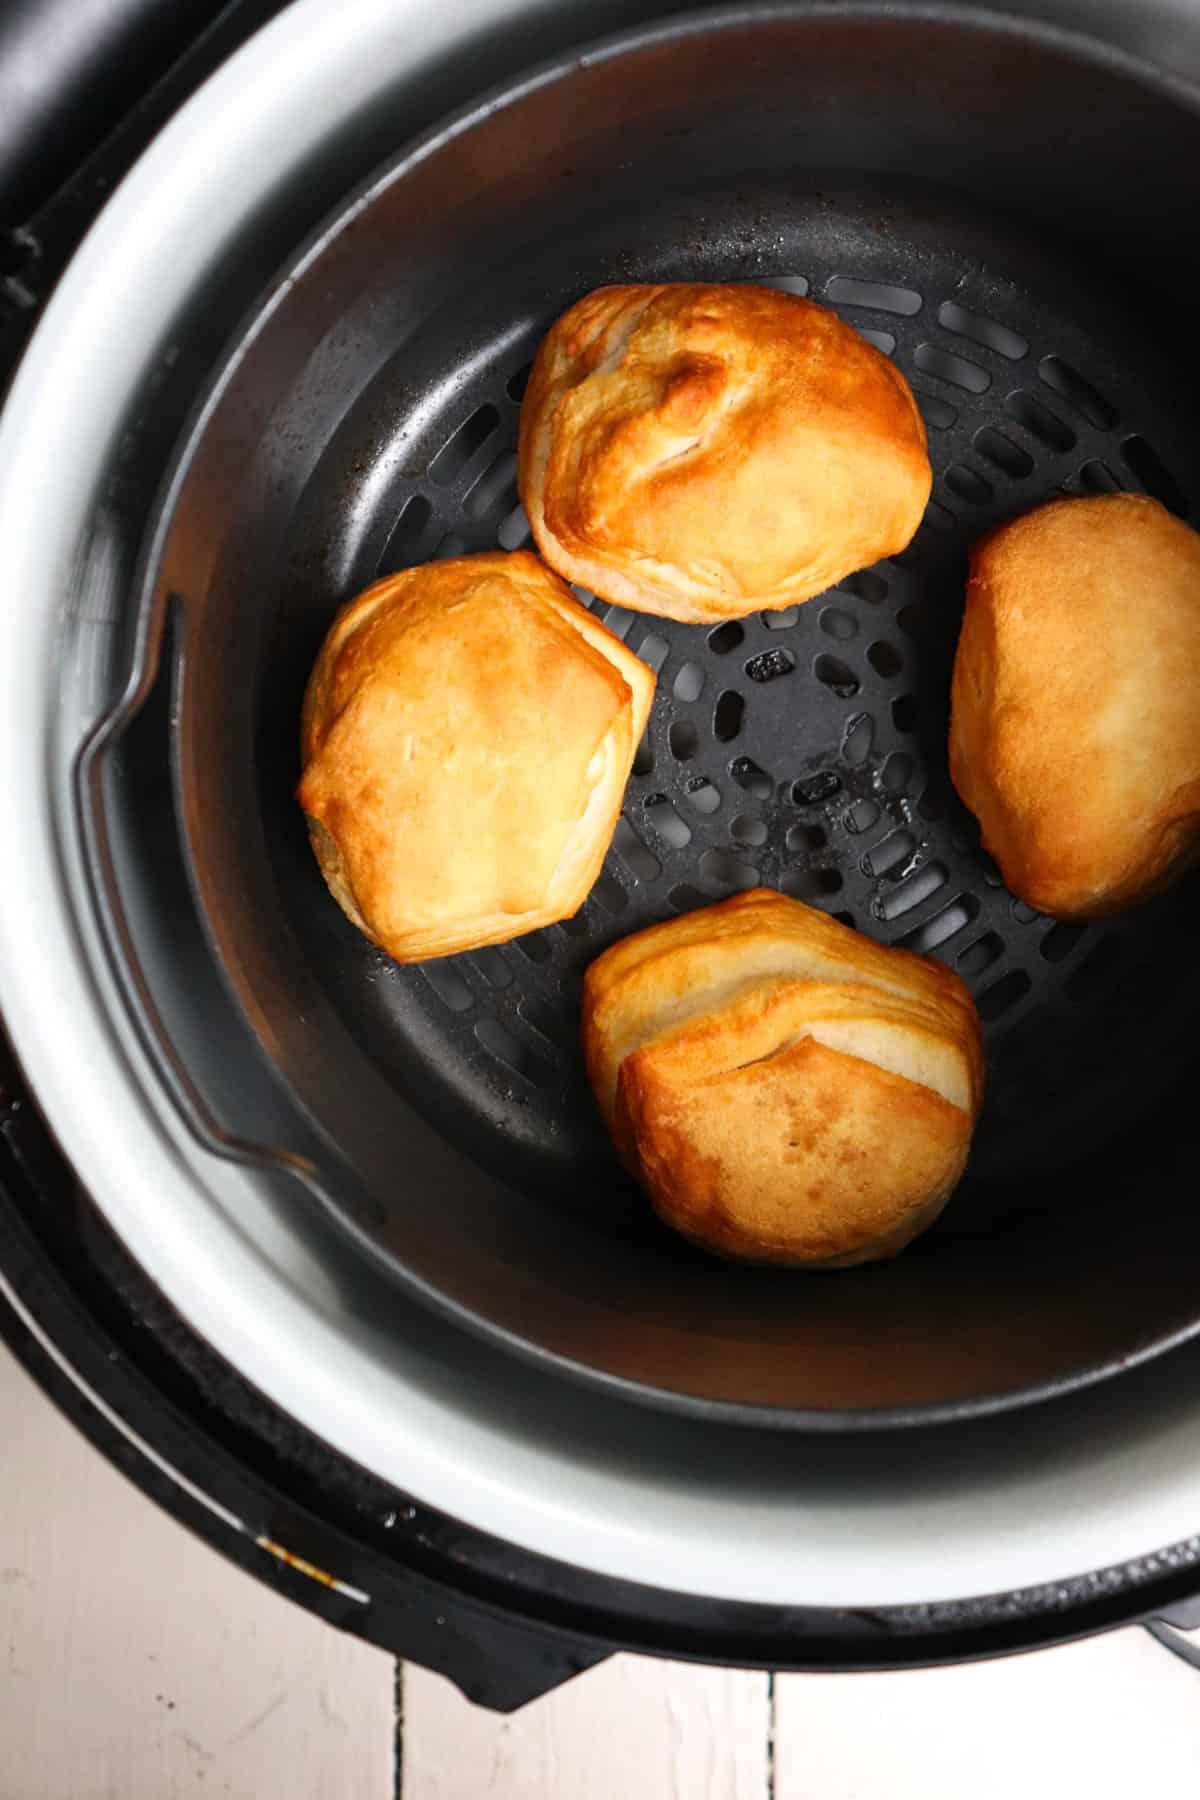 4 cooked biscuits in air fryer basket.